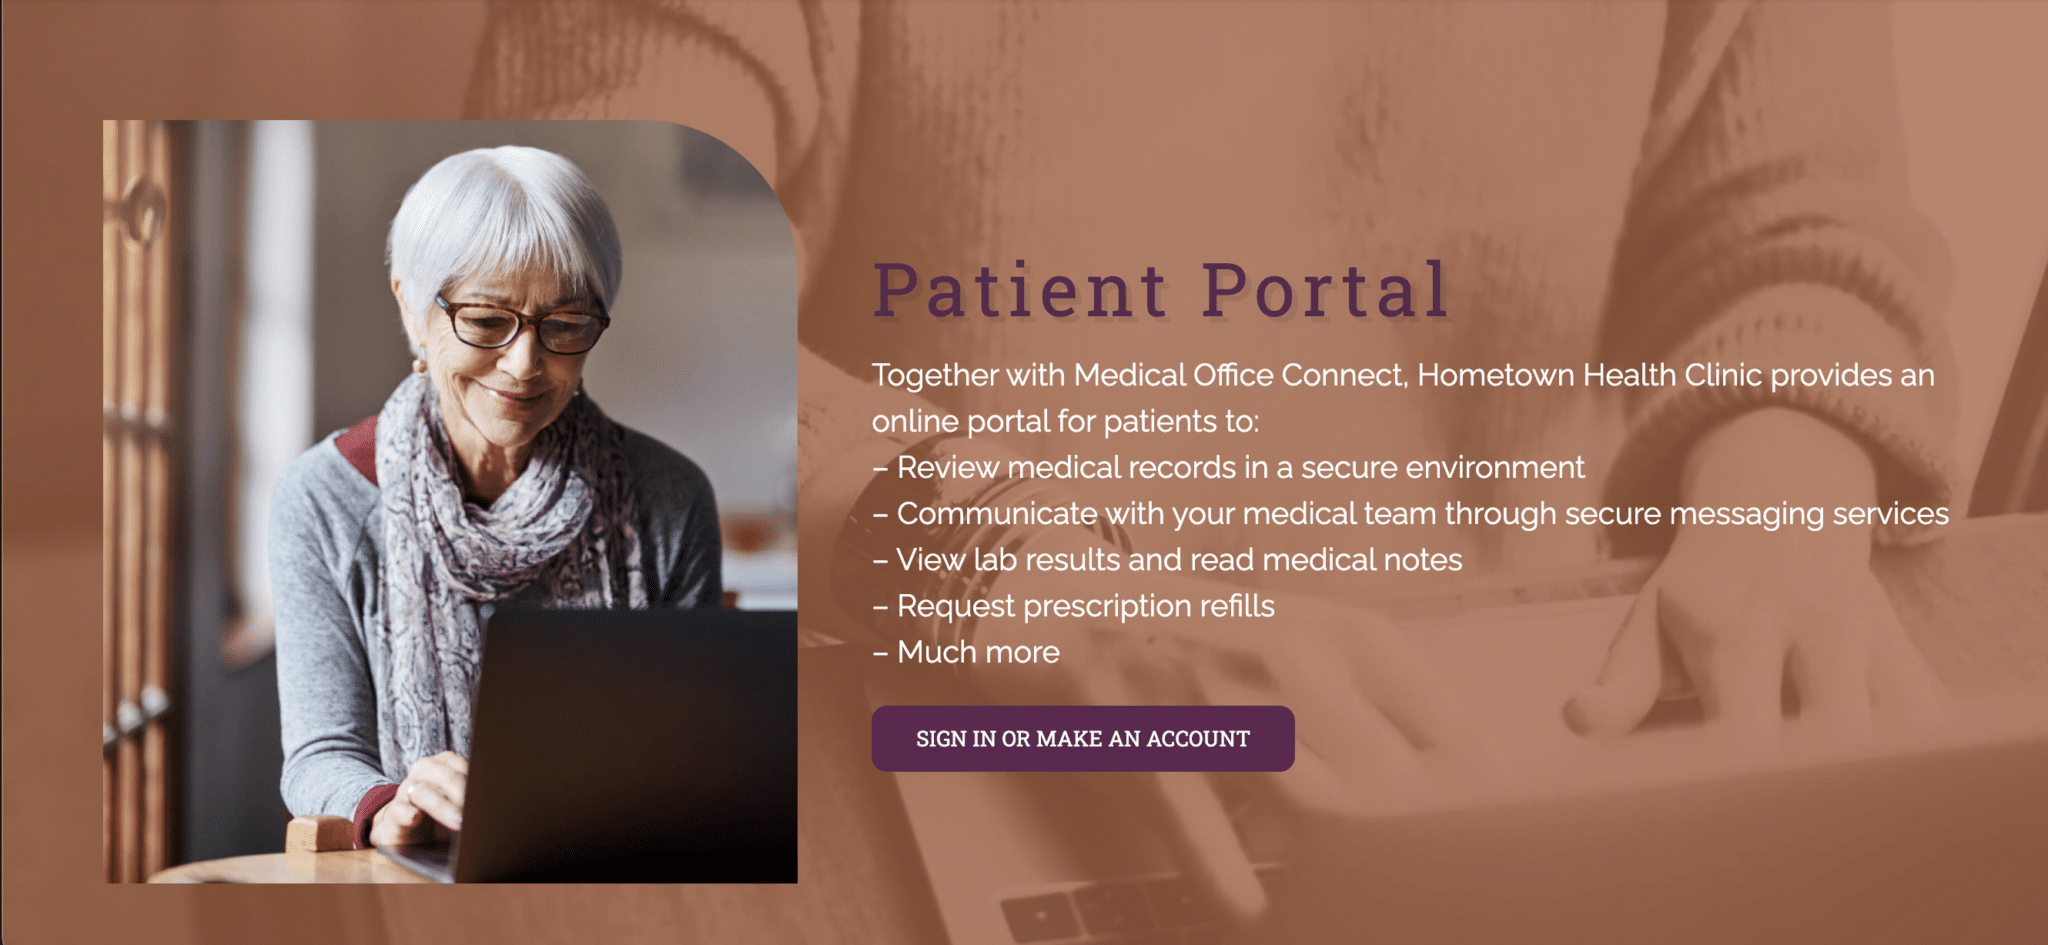 Small square image of a person on a laptop with writing highlighting the Hometown Health Clinic Patient Portal.